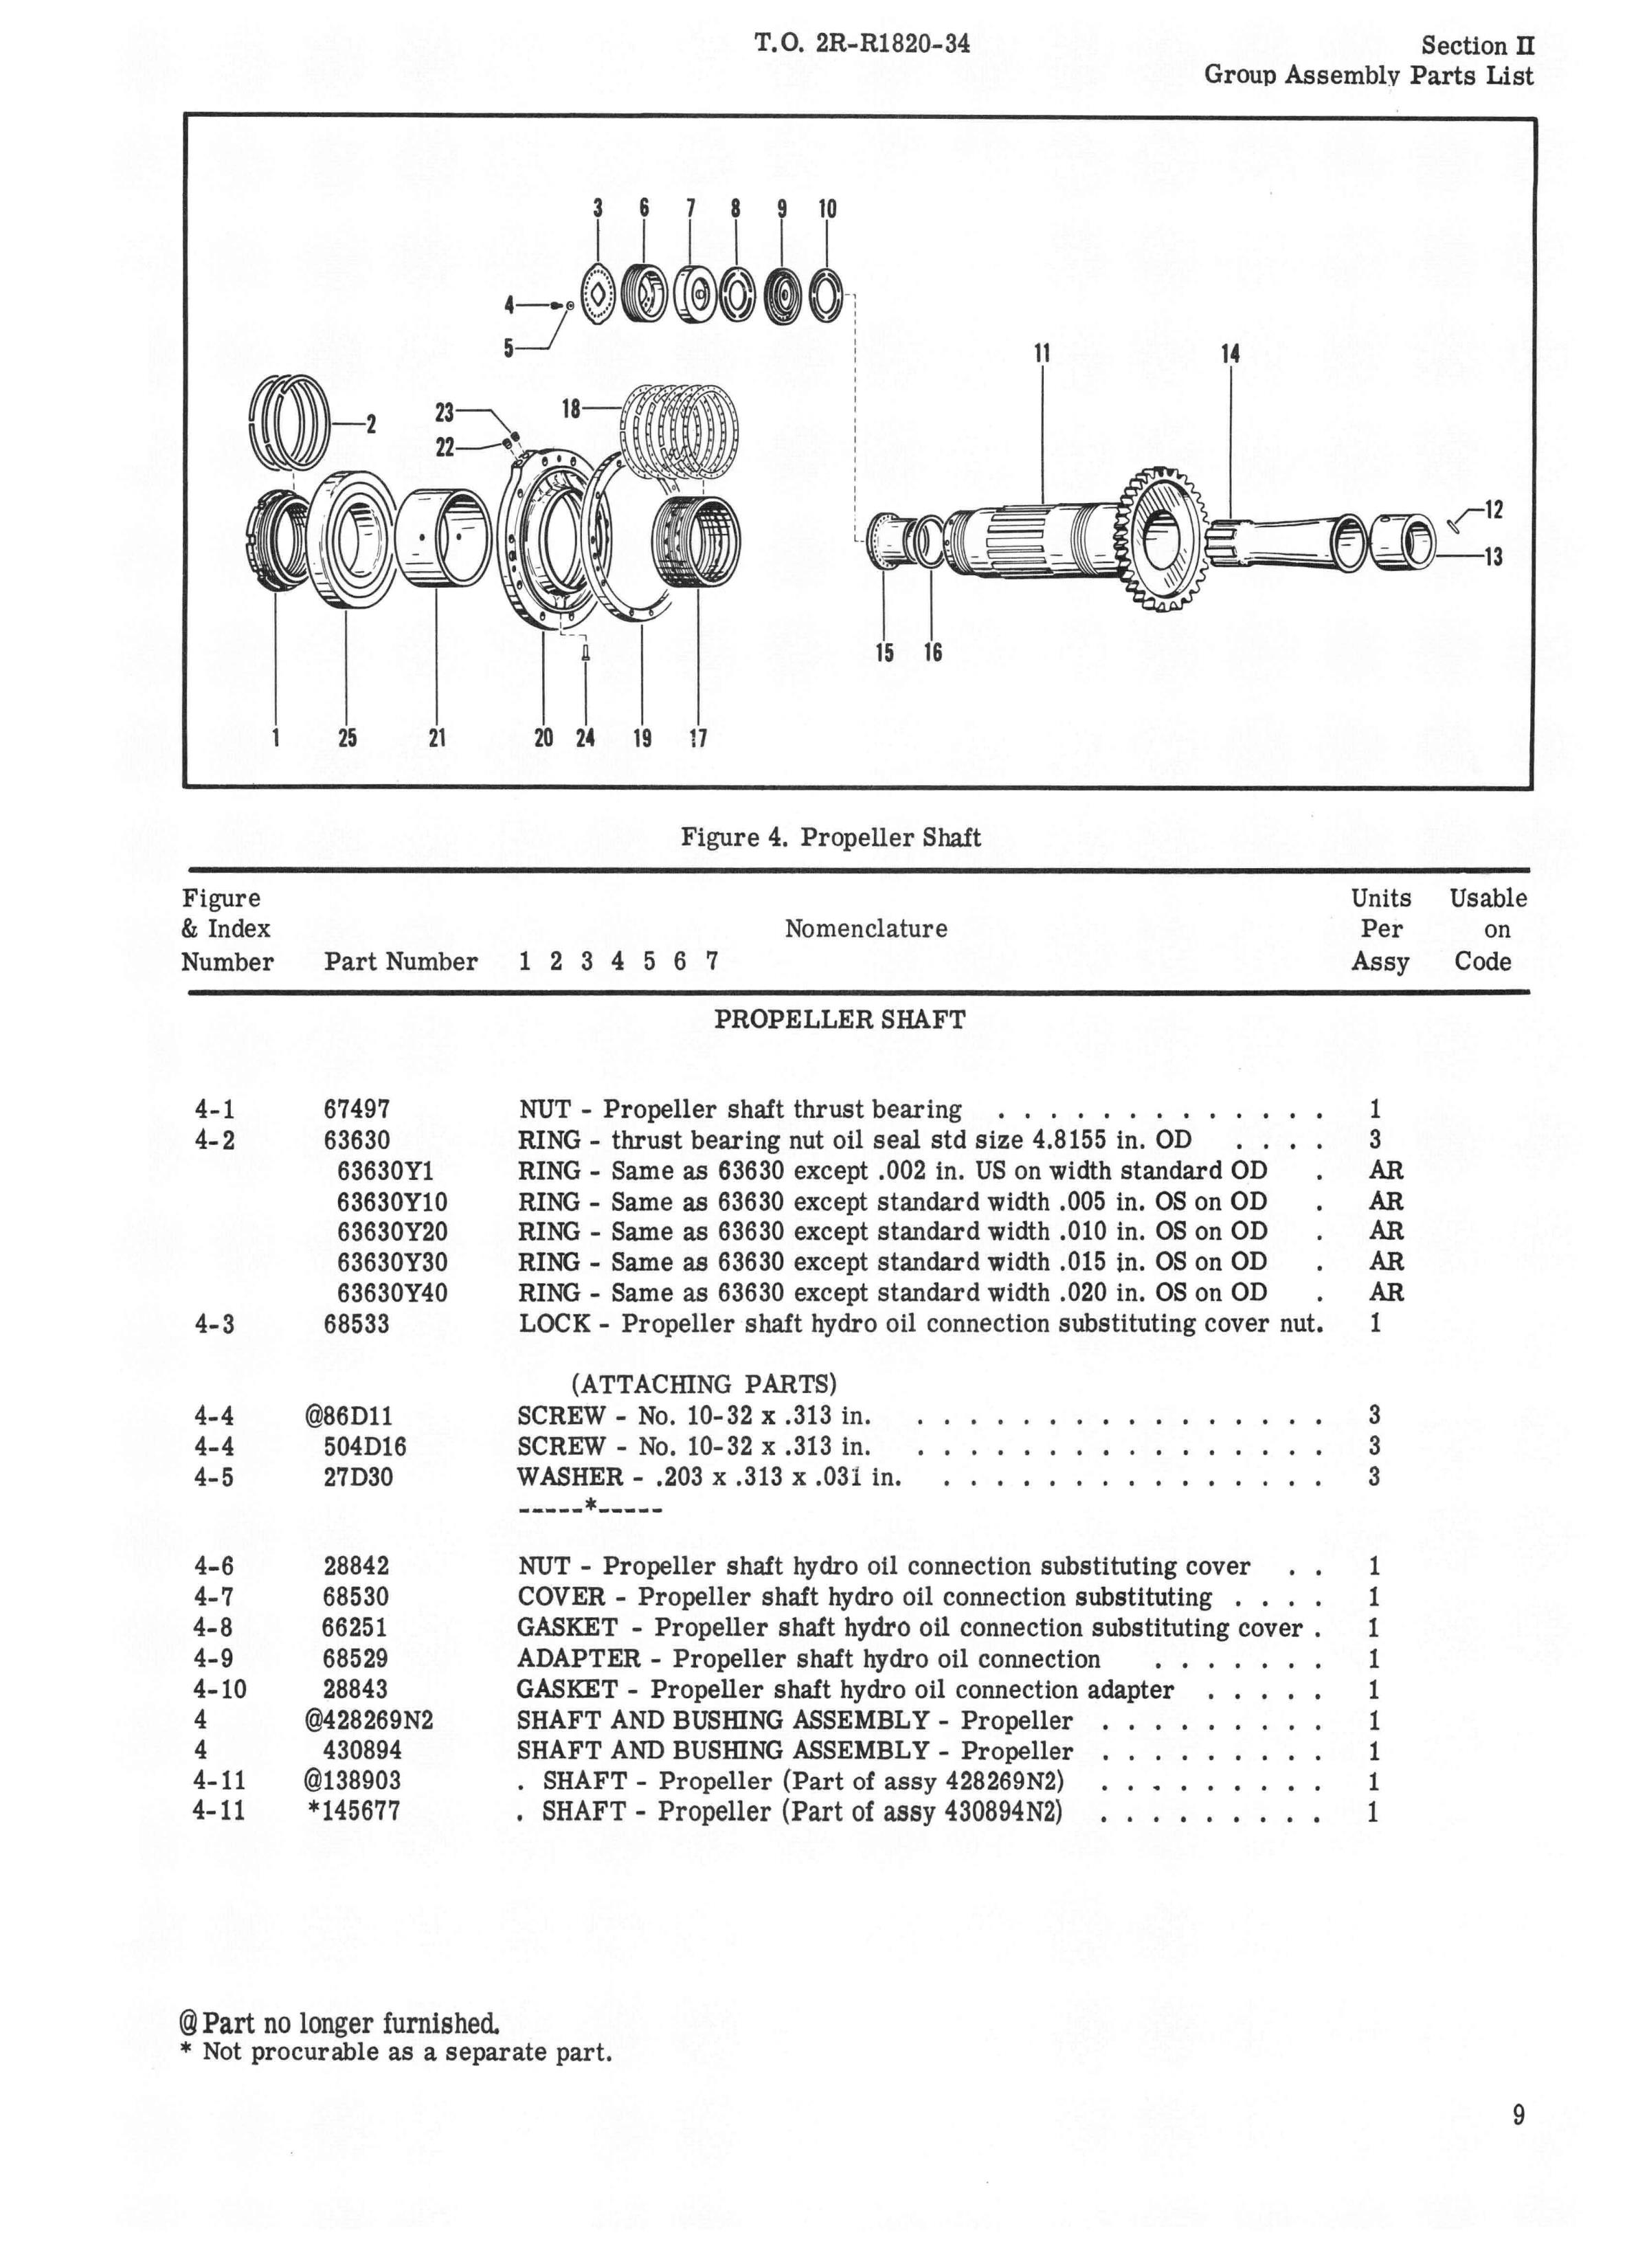 Sample page 13 from AirCorps Library document: Illustrated Parts Breakdown for Model R-1820-103 Engine